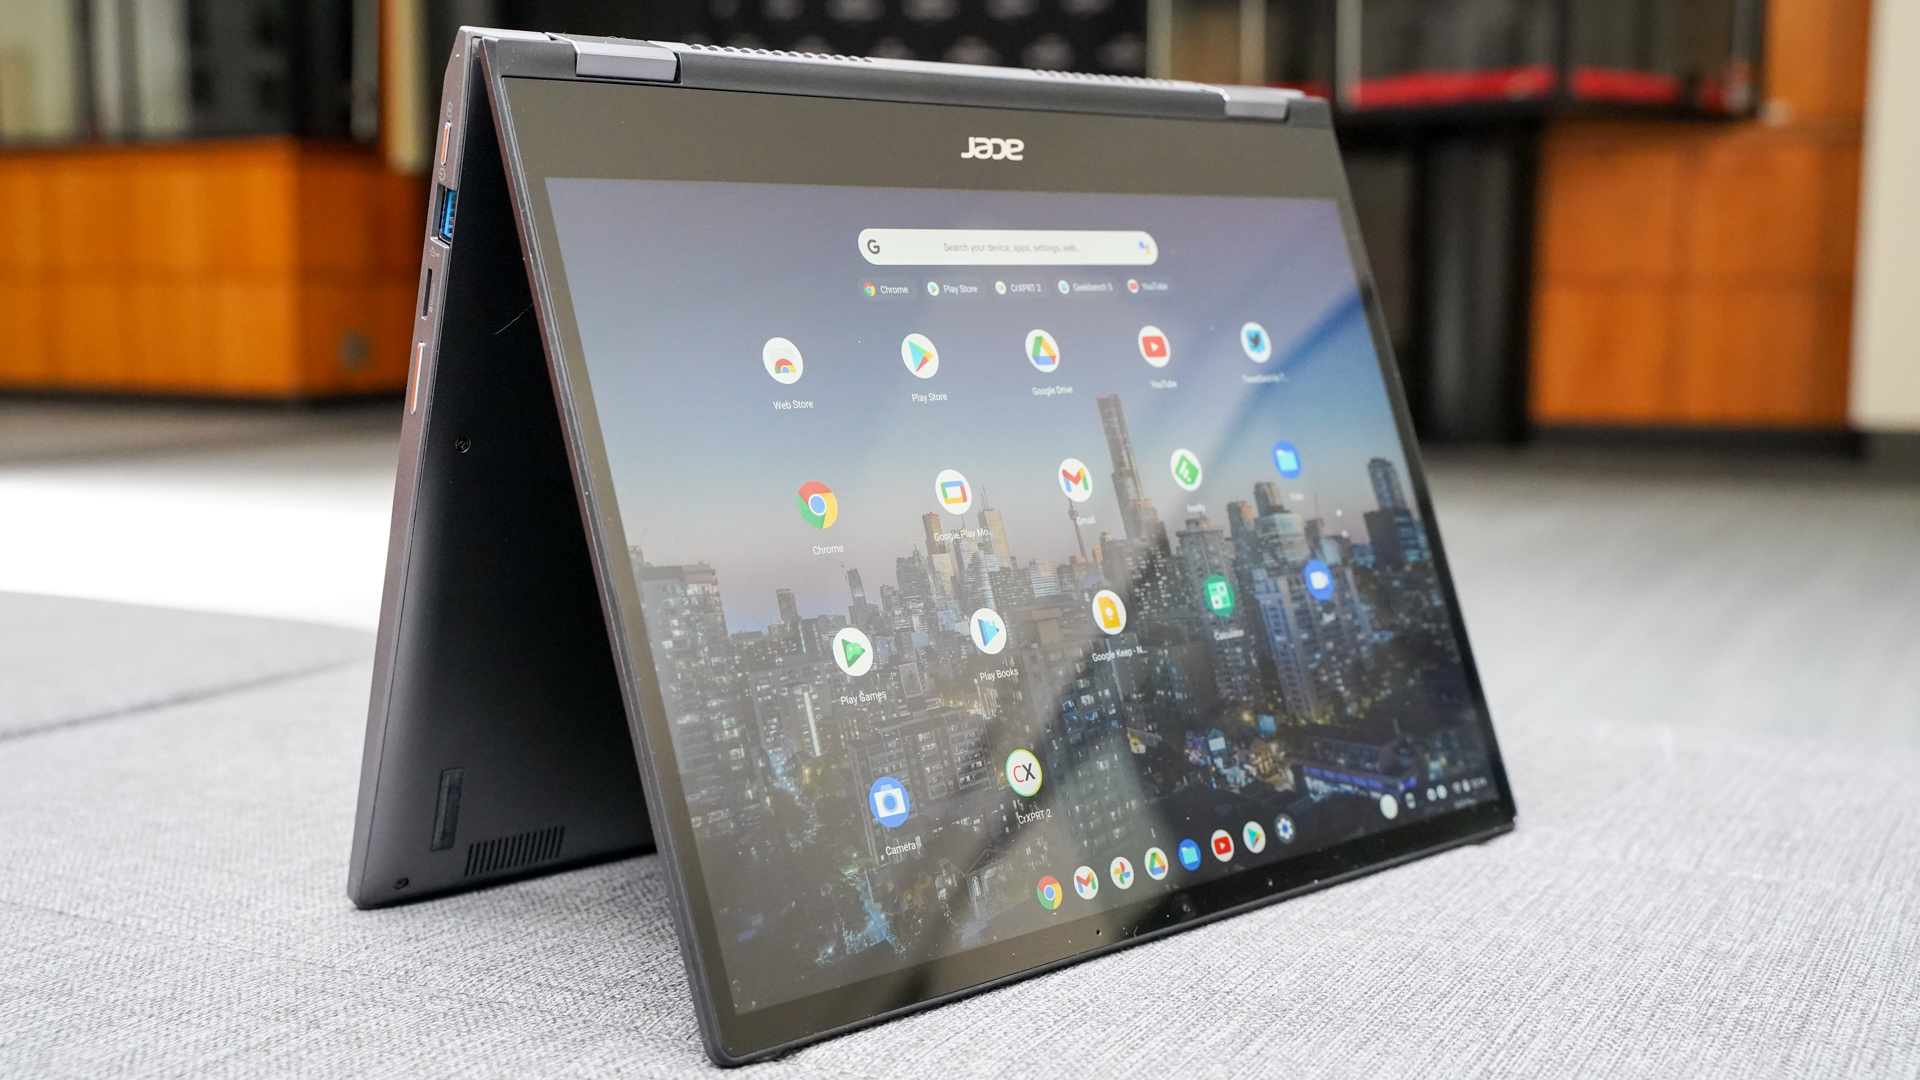 How to record your Chromebook screen